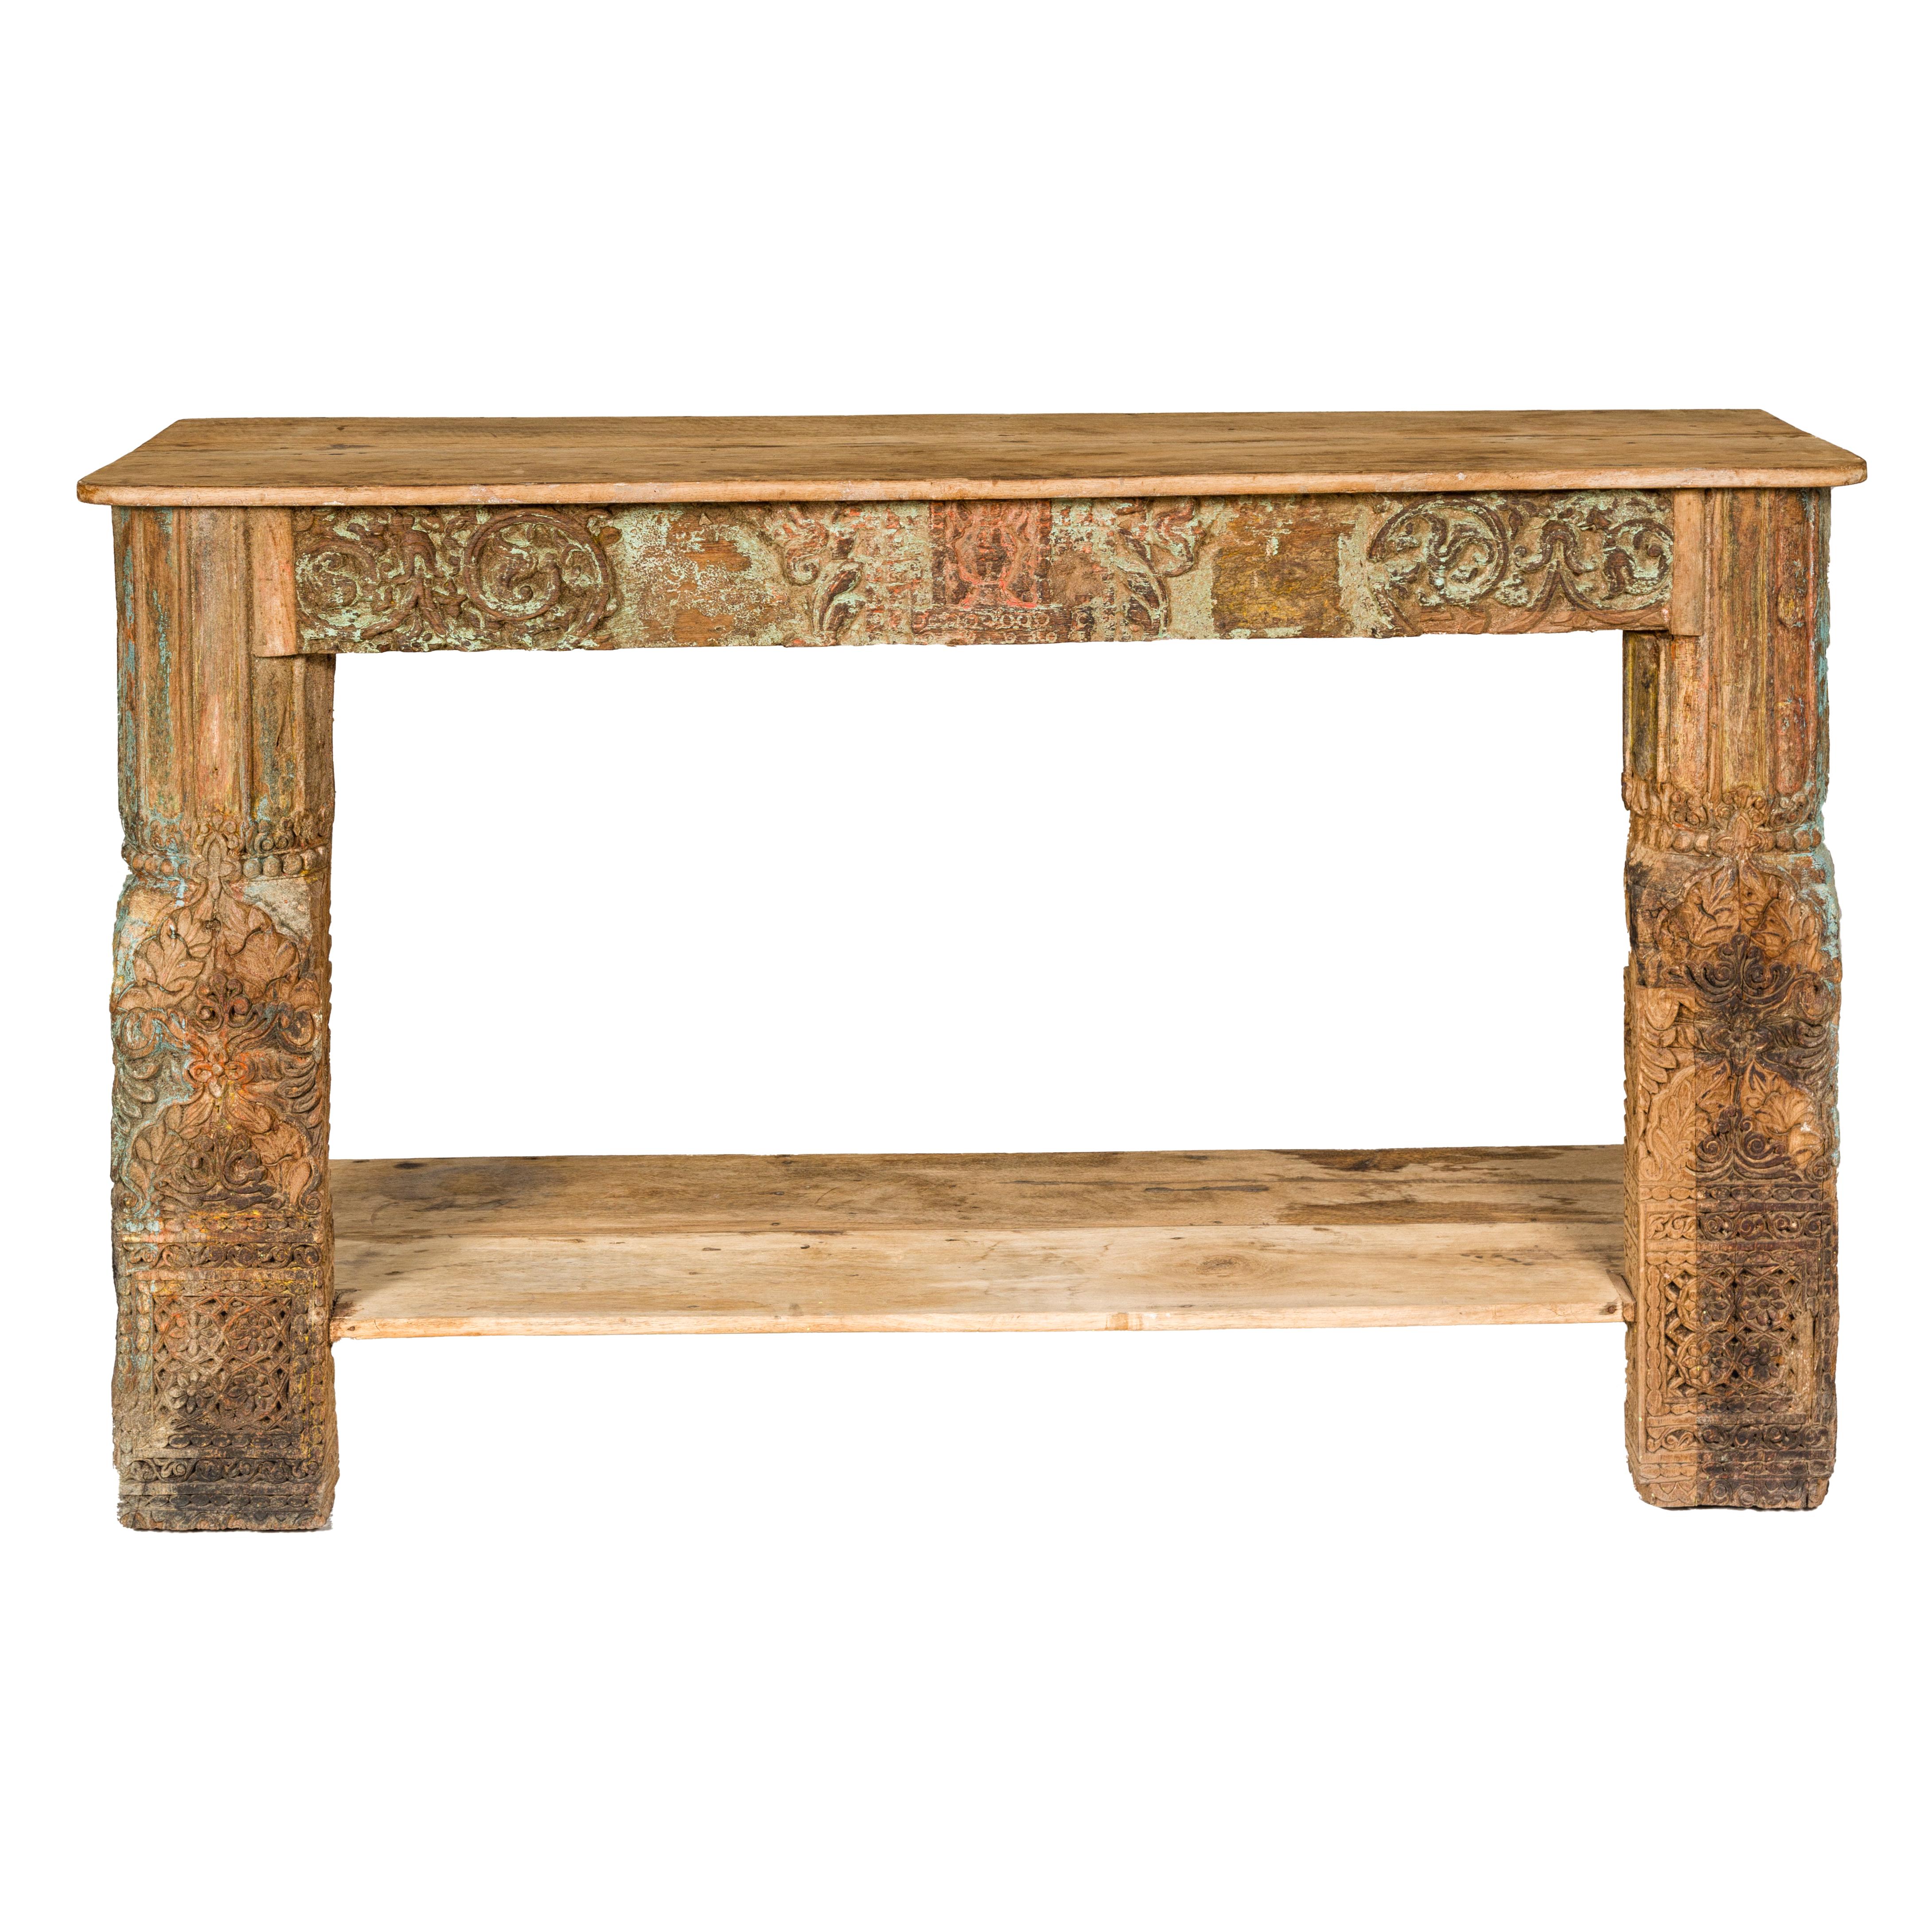 Mughal Style Distressed Polychrome Console Table with Carved Apron with Shelf For Sale 13